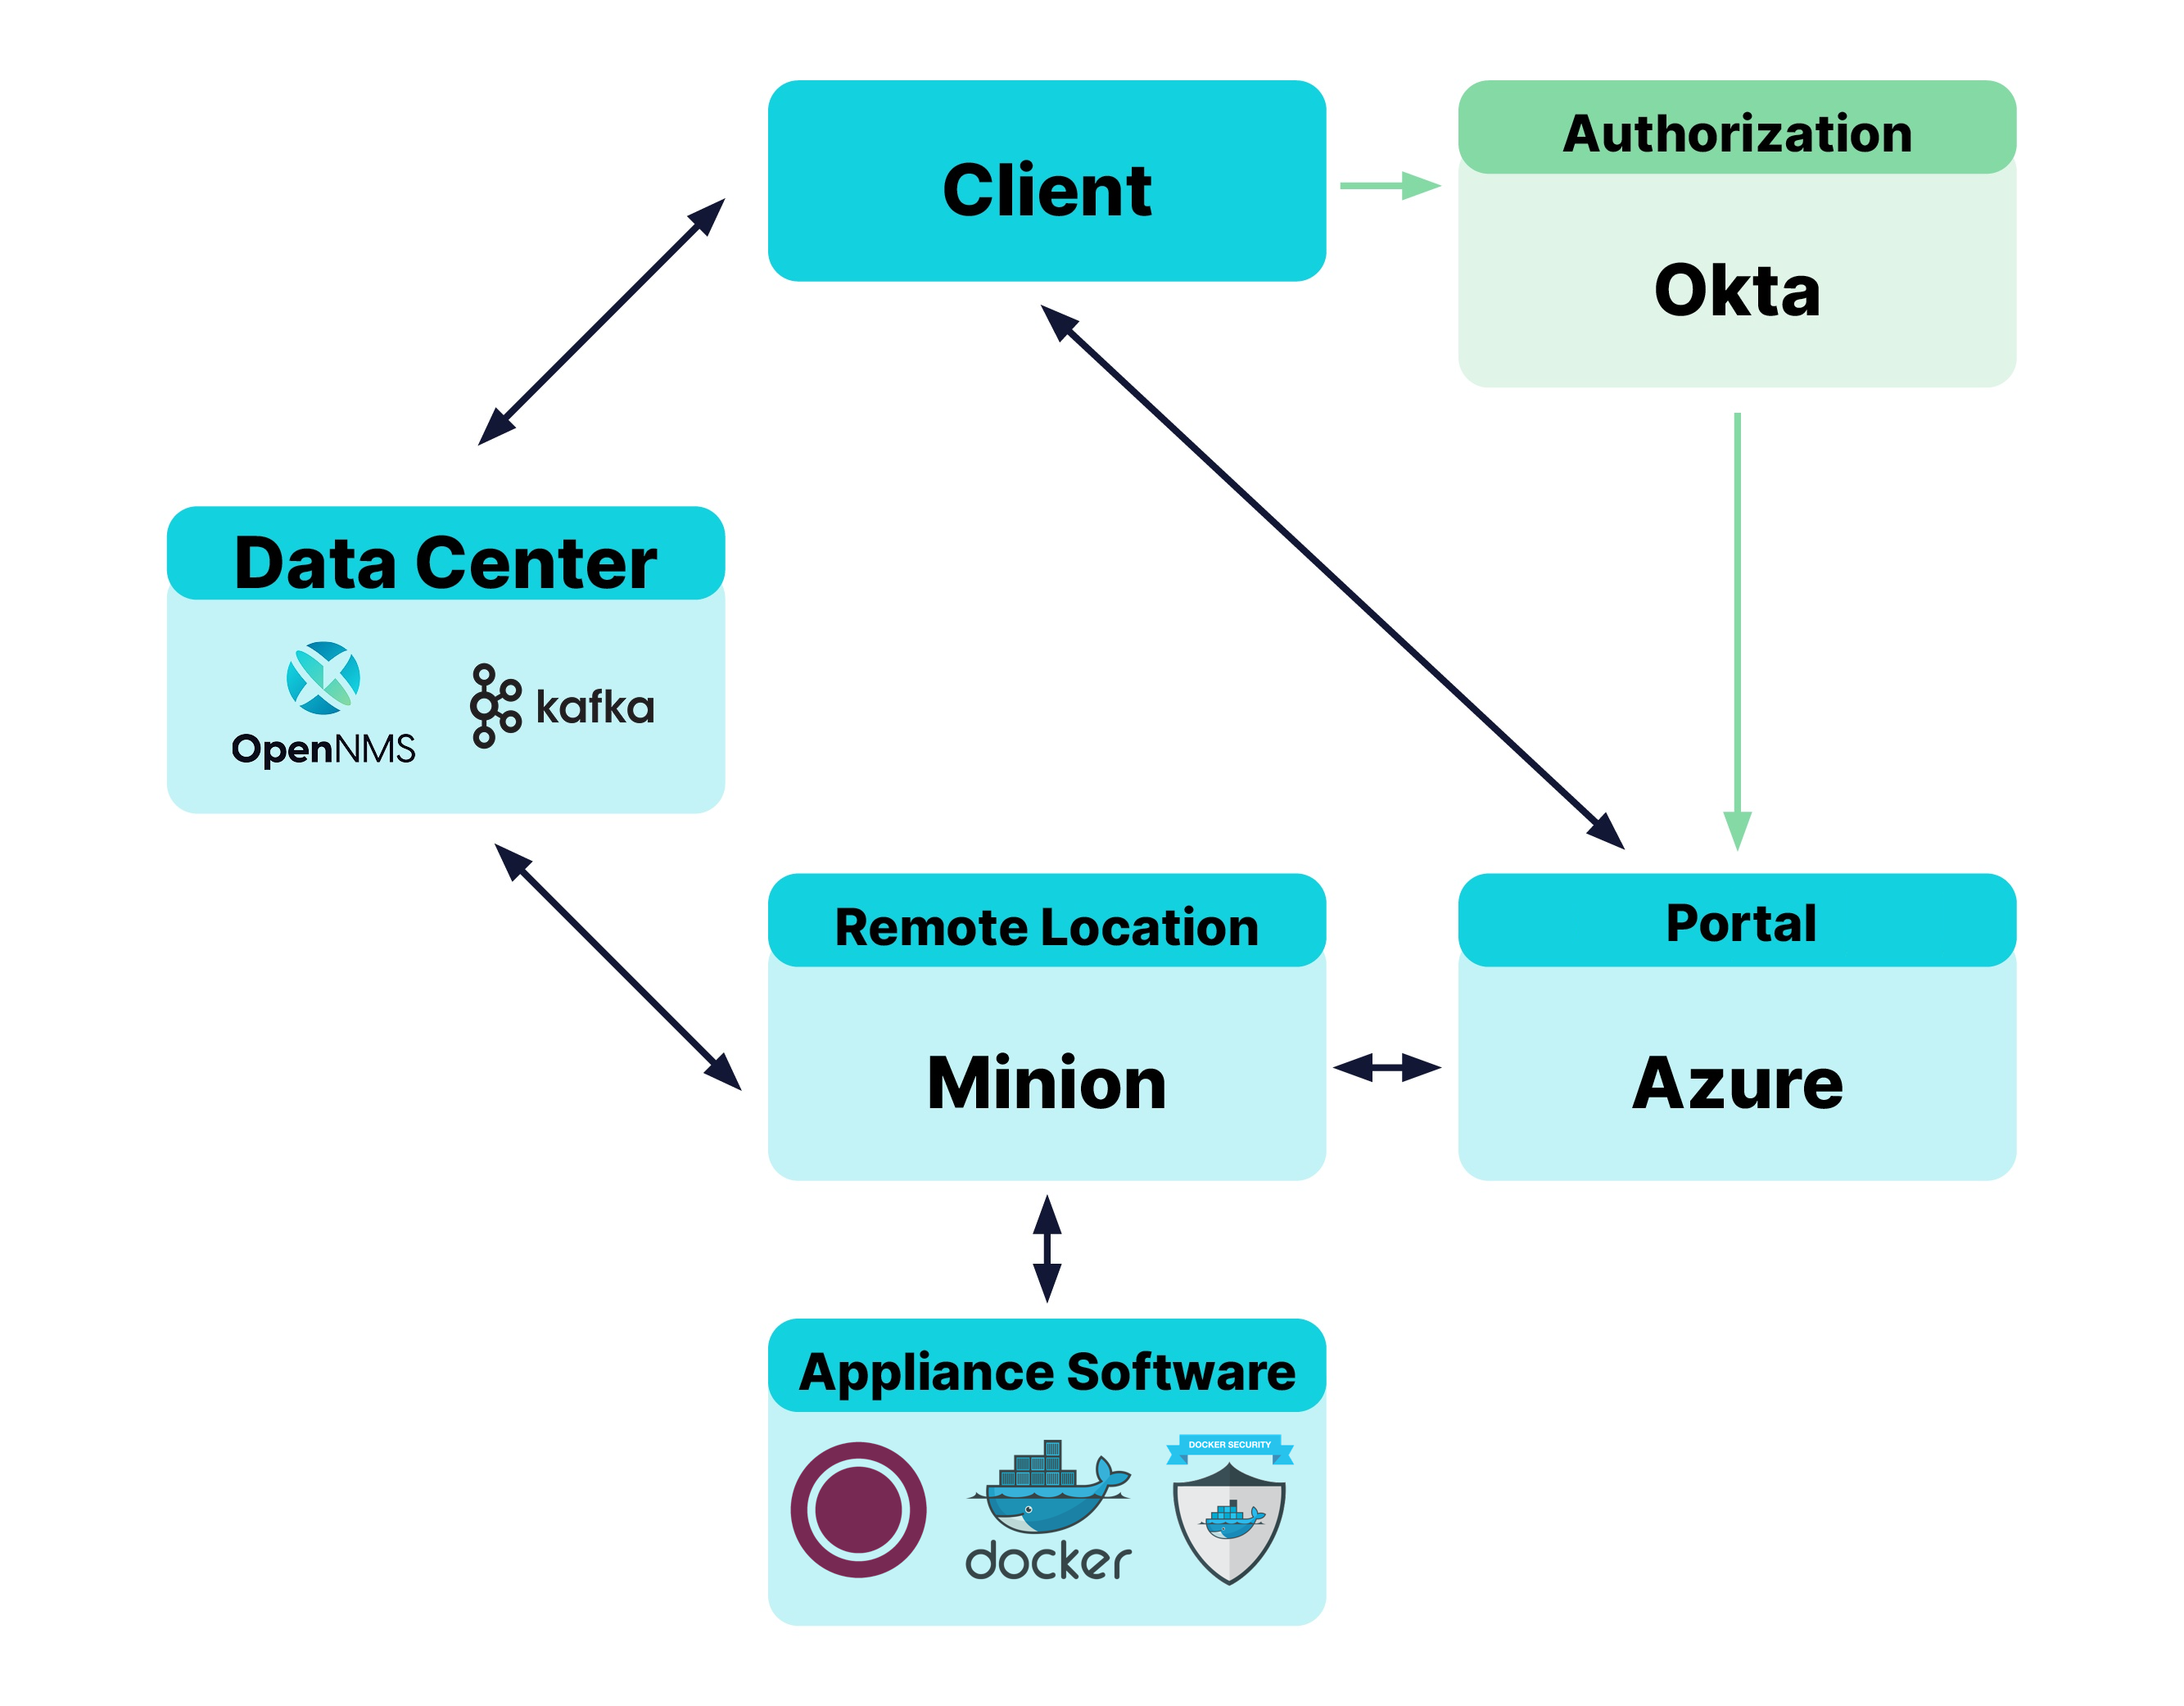 Architecture diagram displaying Portal components and the relationships among them.